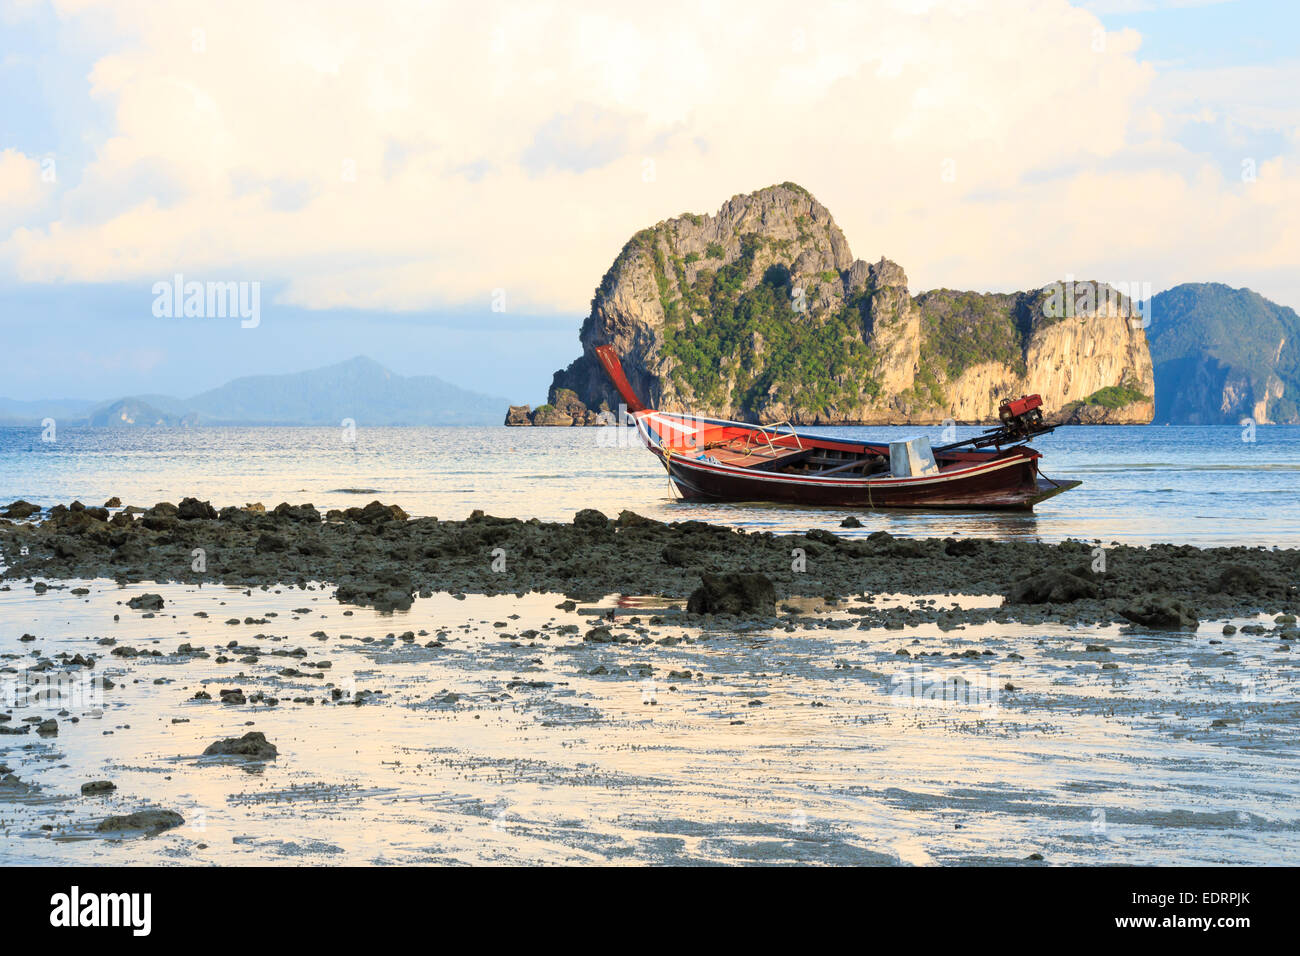 Native Boot am Strand und Insel Abend in Trang, Thailand Stockfoto